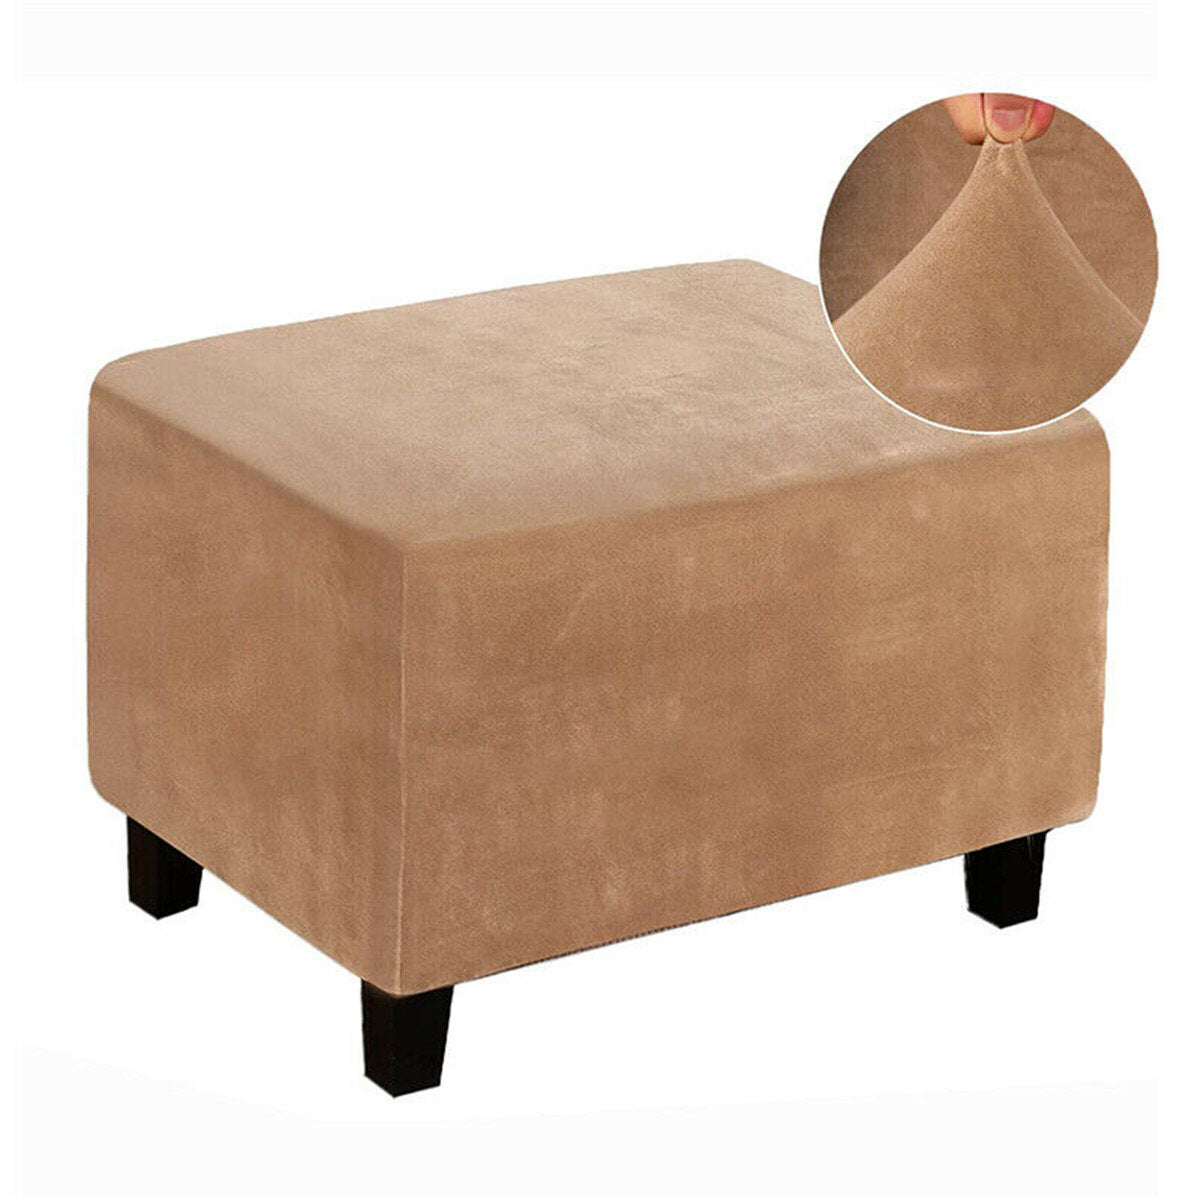 Elastic Ottoman Cover Footstool Protector Stretch Storage Stool Chair Seat Slipcover Home Office Furniture Decor